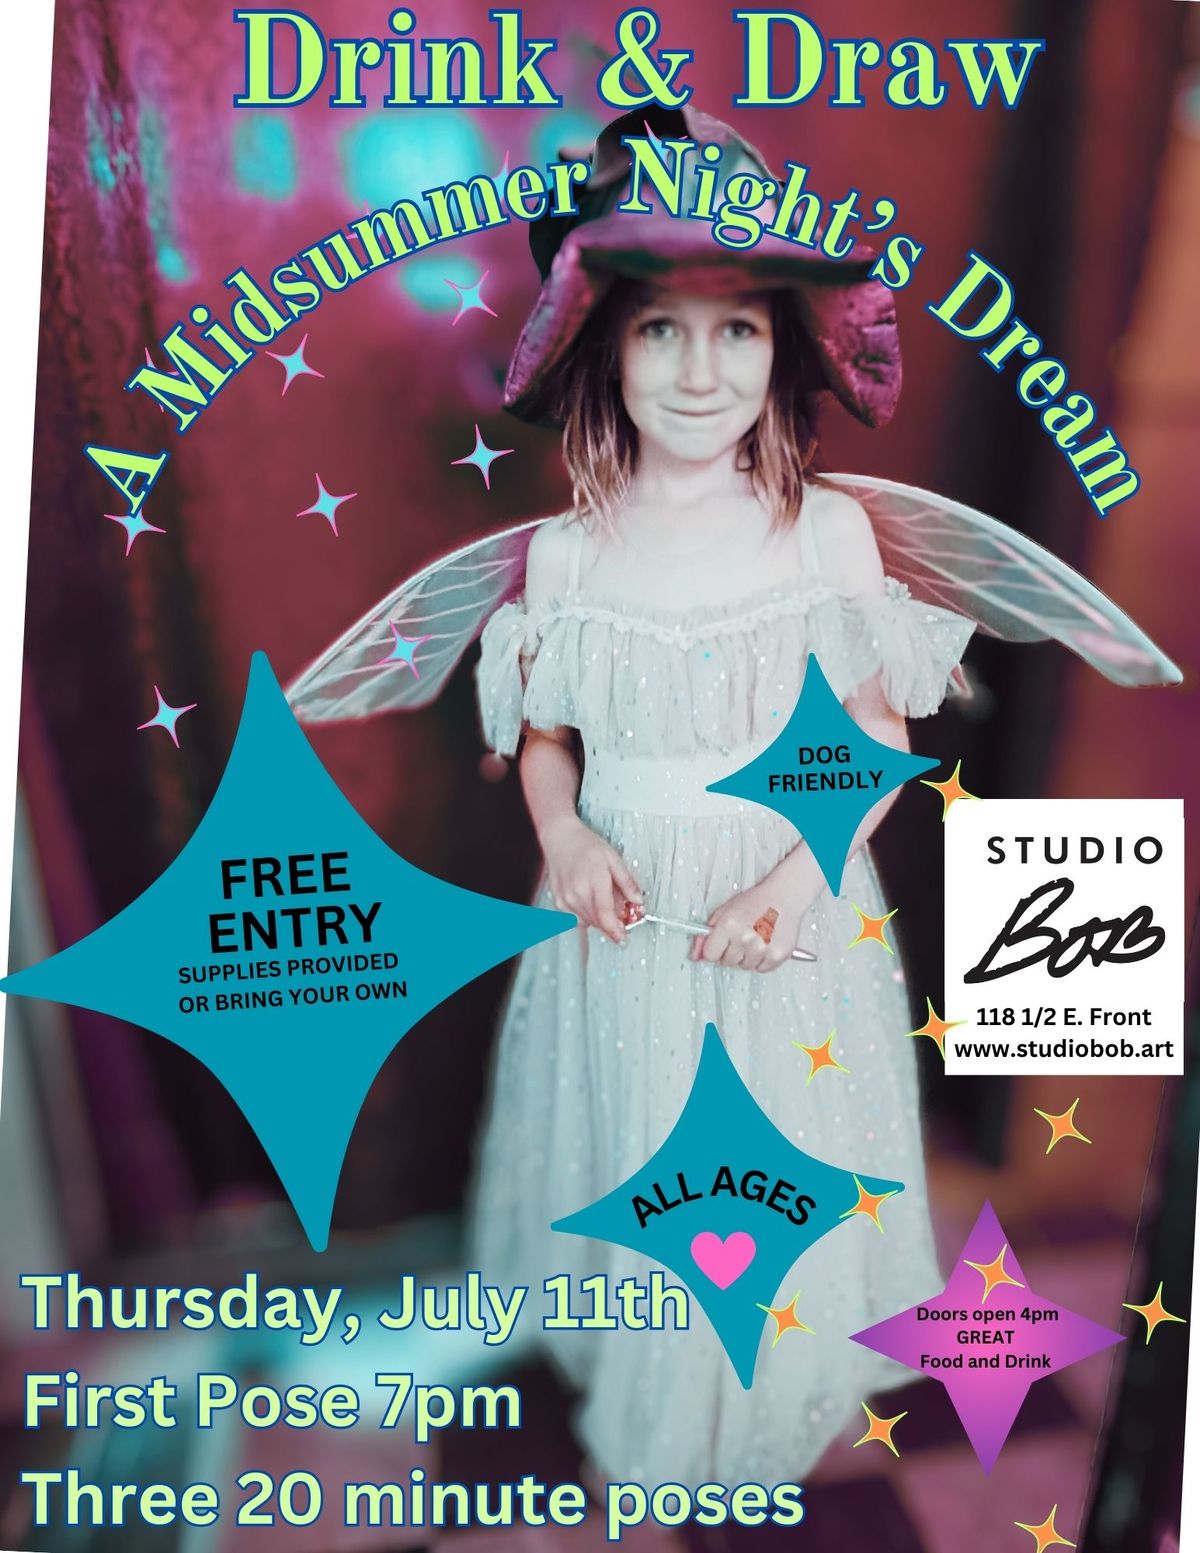 Drink & Draw with A Midsummer Night's Dream July 11th 7pm Free-ALL AGES-Dog Friendly